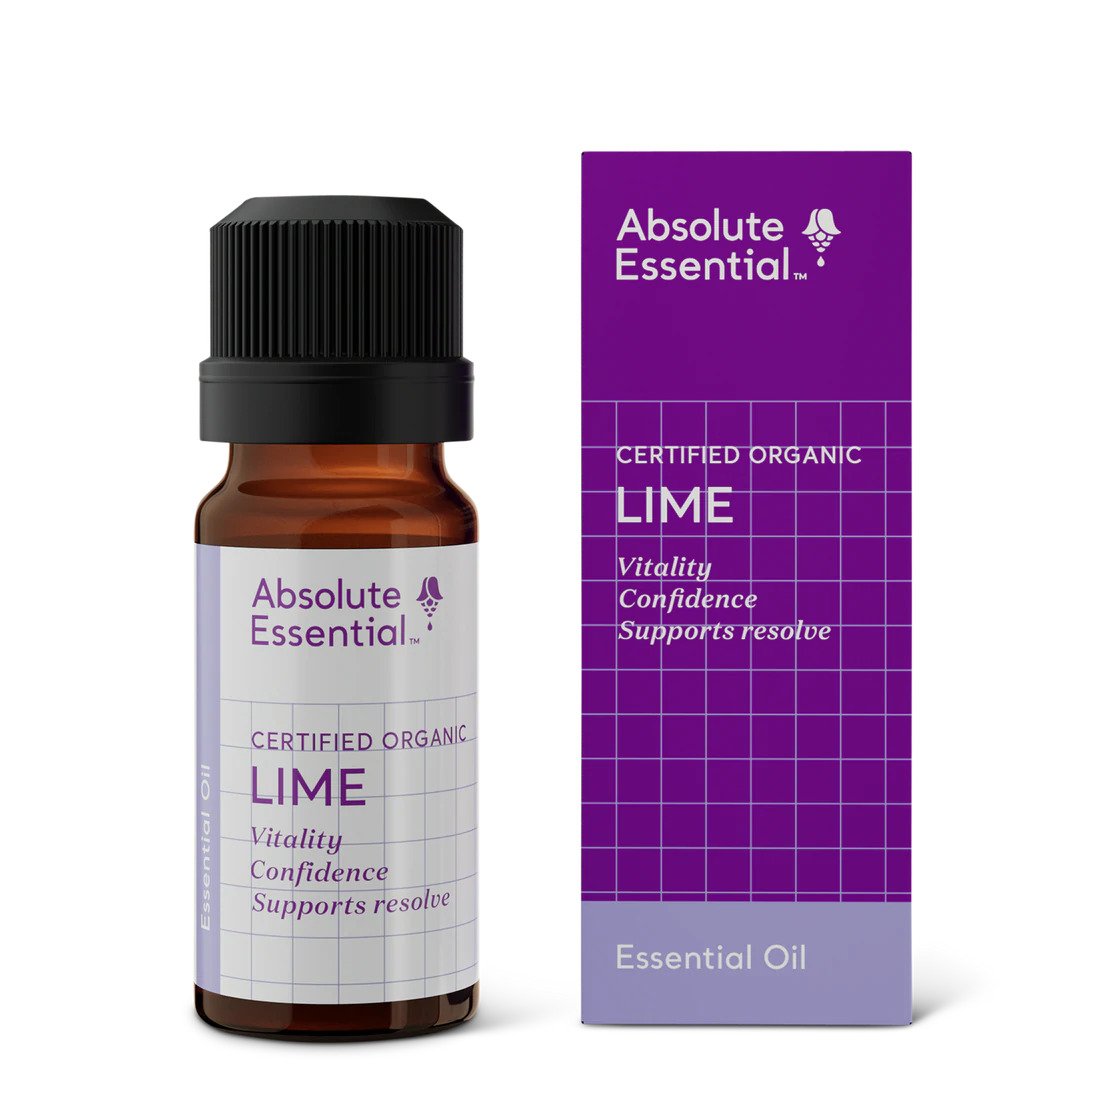 Absolute Essential Lime (Organic)